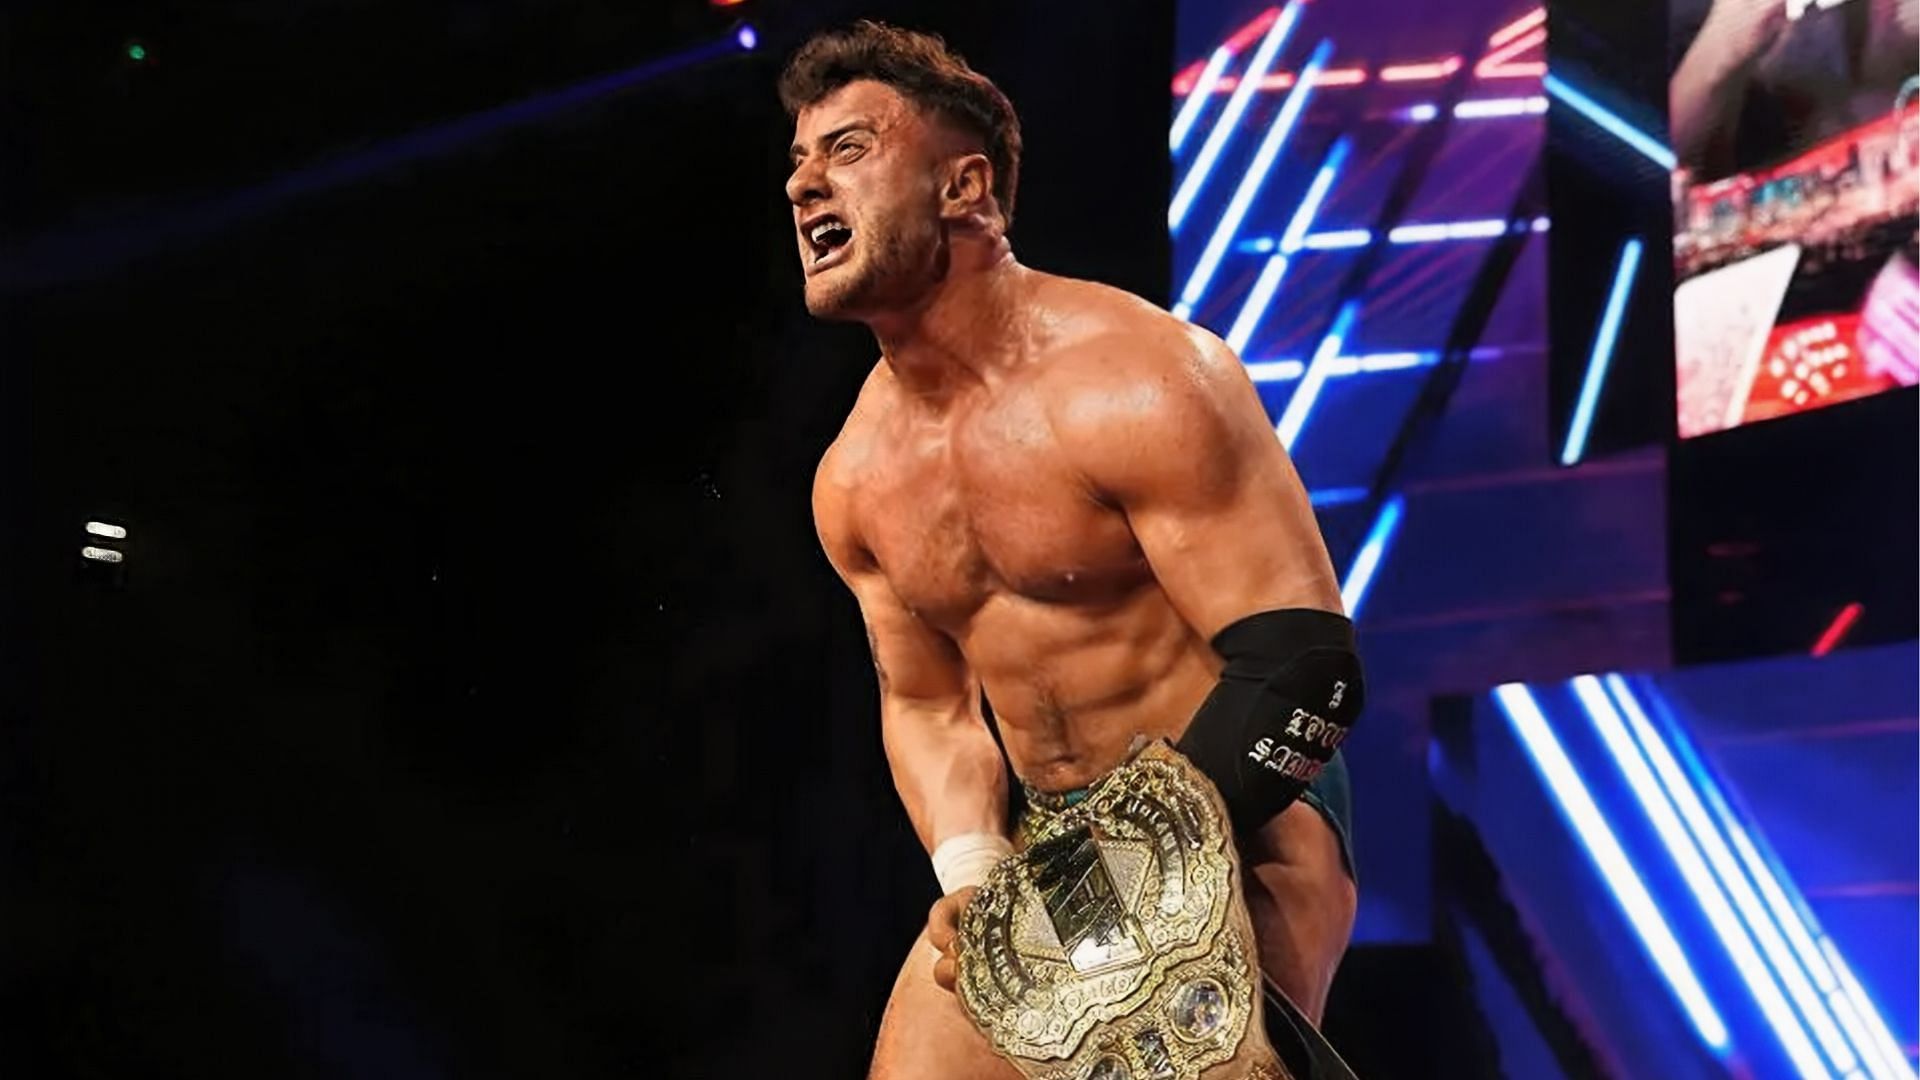 MJF has been working overtime as AEW World and ROH Tag Team Champion